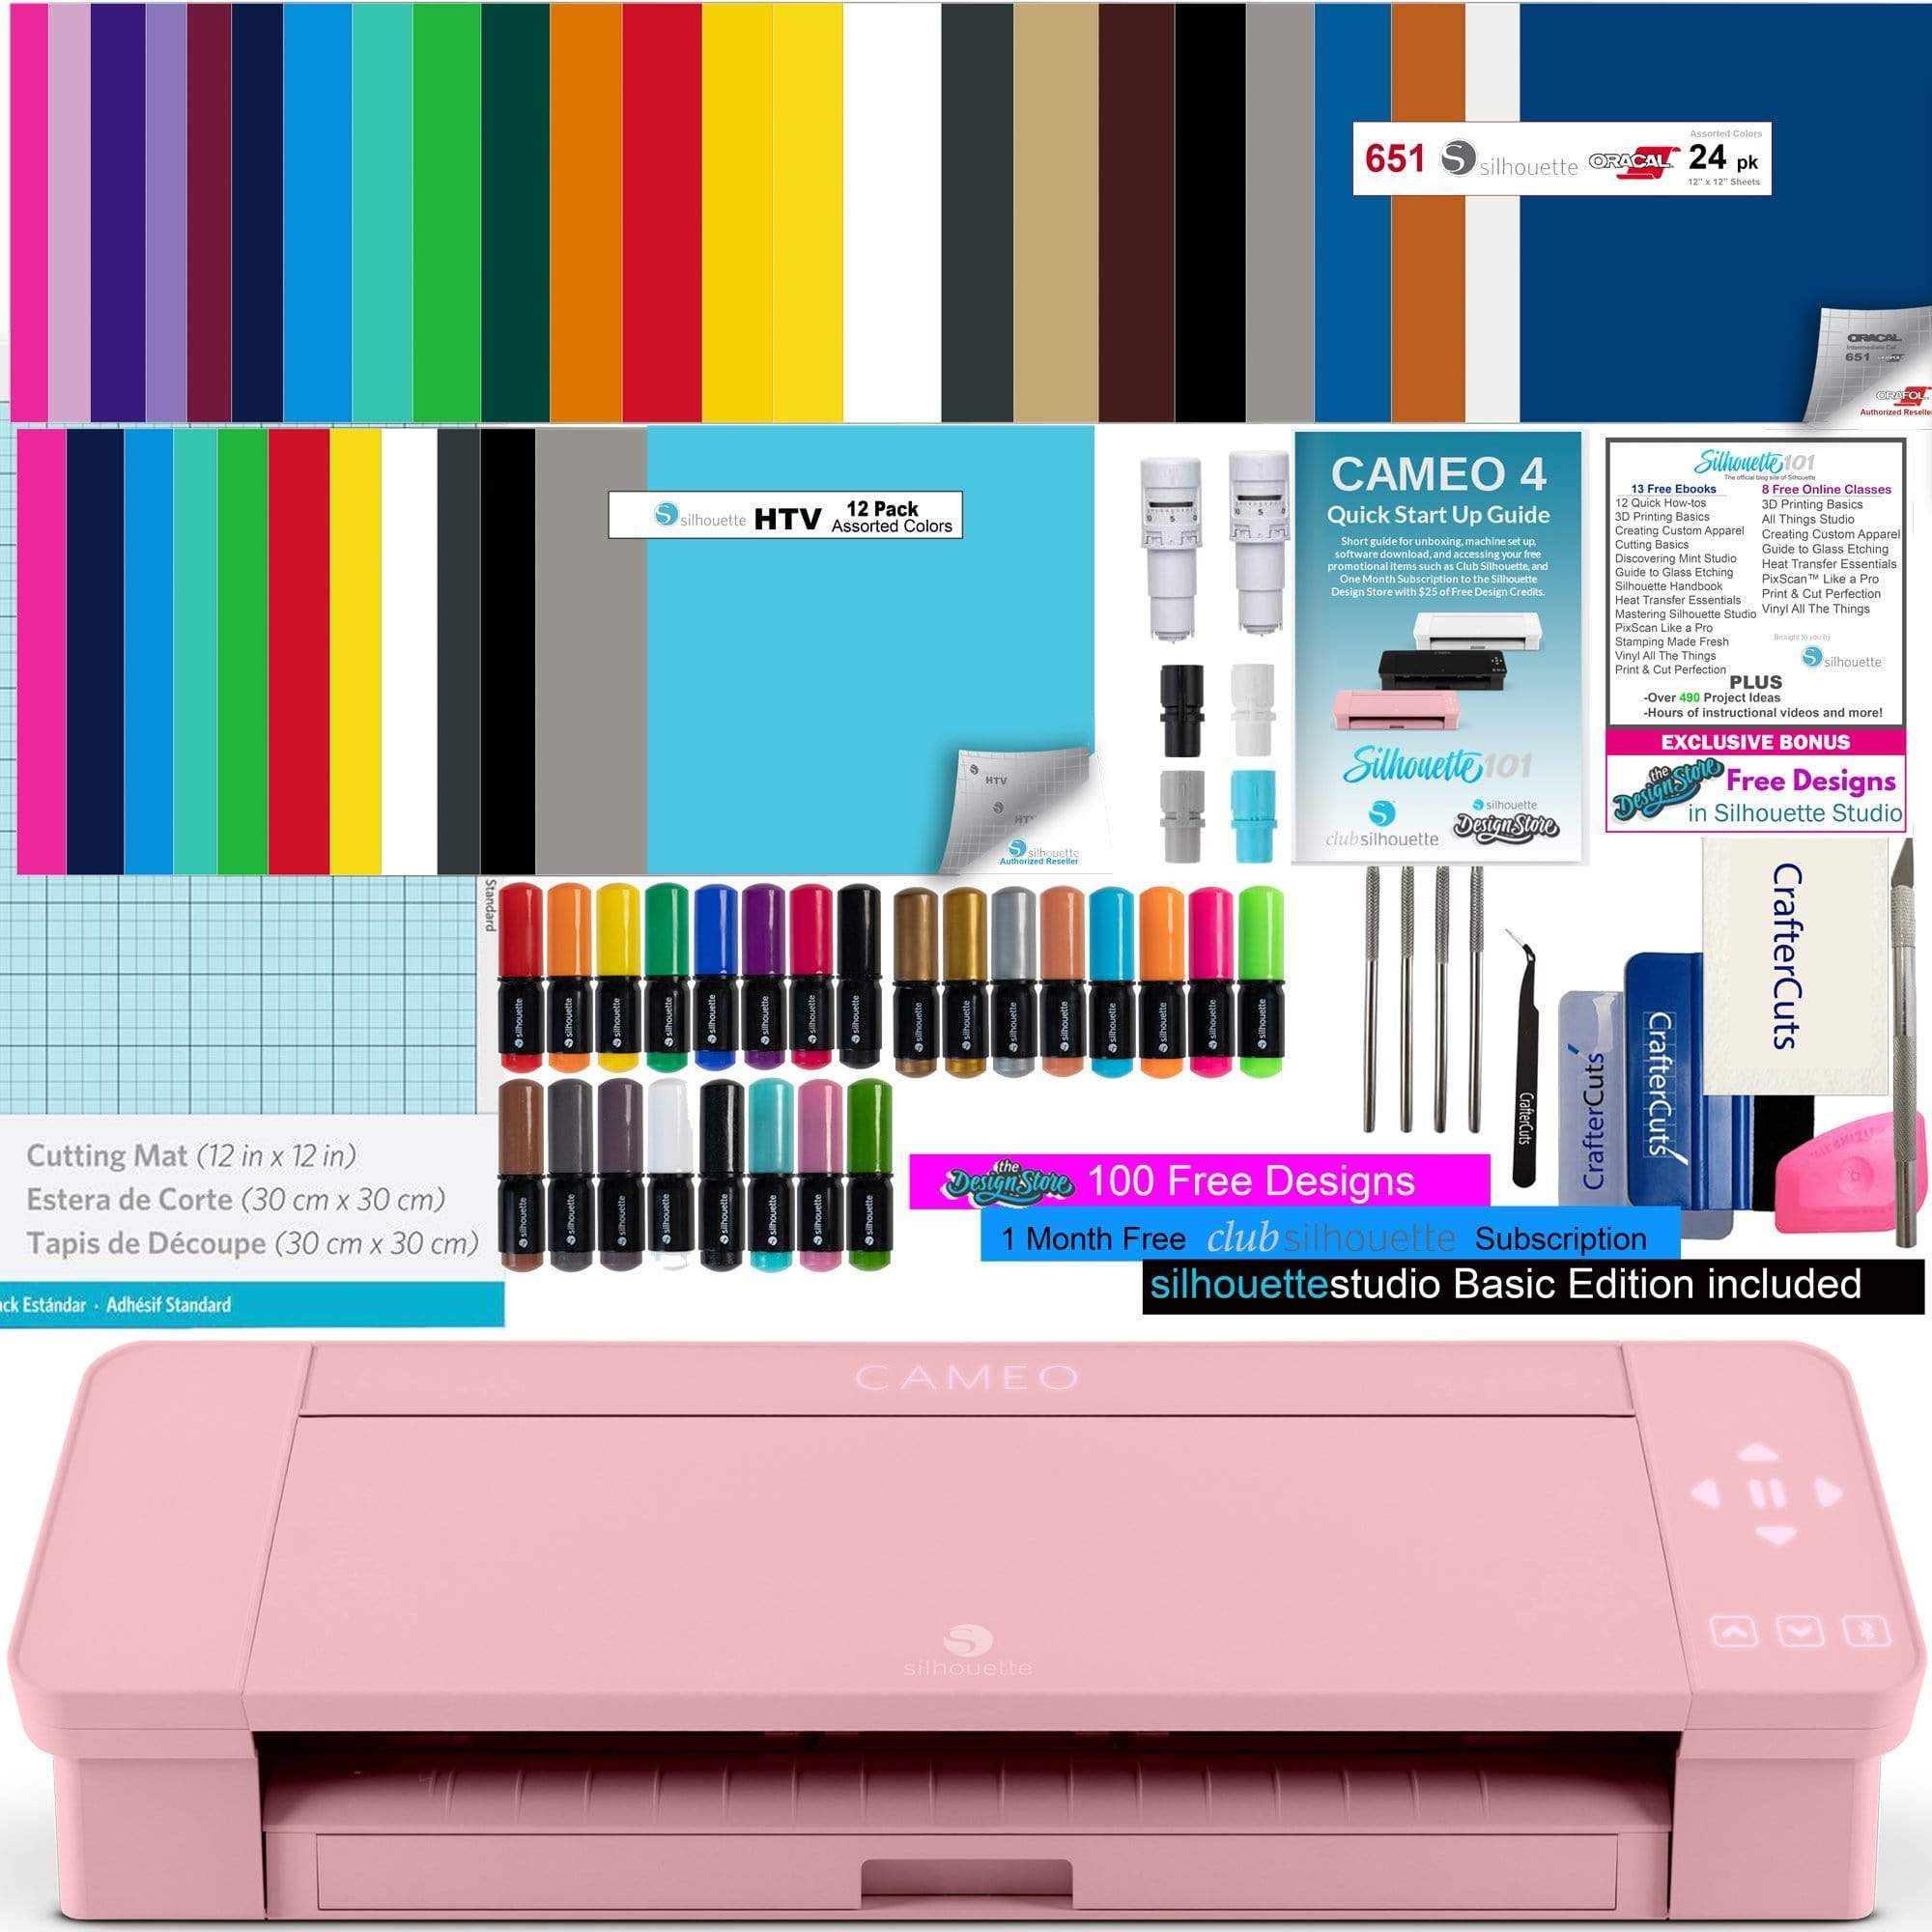 Silhouette America Silhouette Cameo 4 Deluxe Vinyl Bundle with 24 Sheets of Vinyl, 12 sheets of HTV, 24 Pack pens, Vinyl Tool Kit, 2 Autoblades, and 150 Designs- Pink